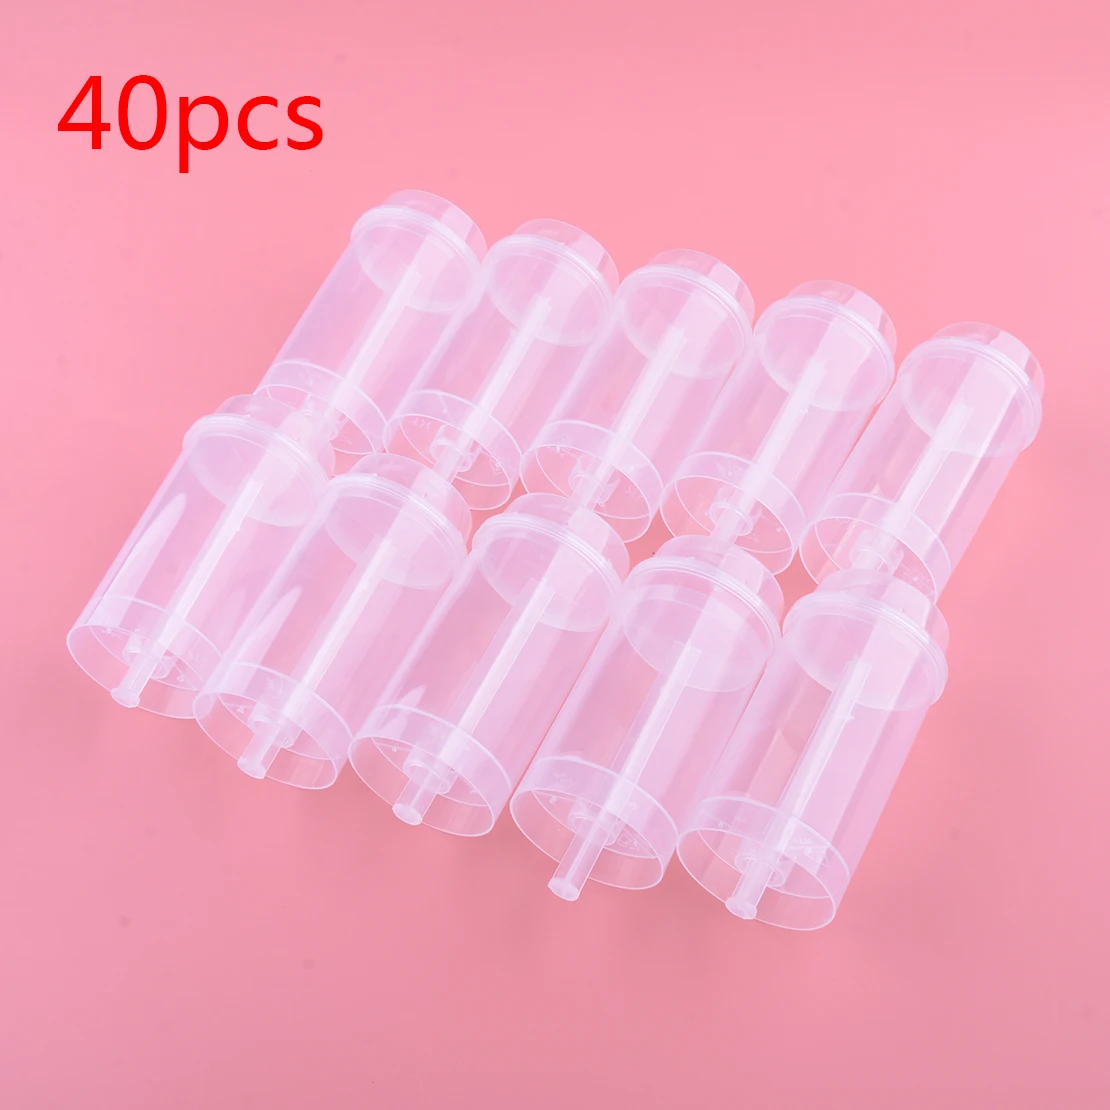 

40Pcs Transparent PP Anti-skid DIY Pushable Push Up Pop Cake Holders Containers for Cheesecake Mousse Pudding Ice-creams Jelly